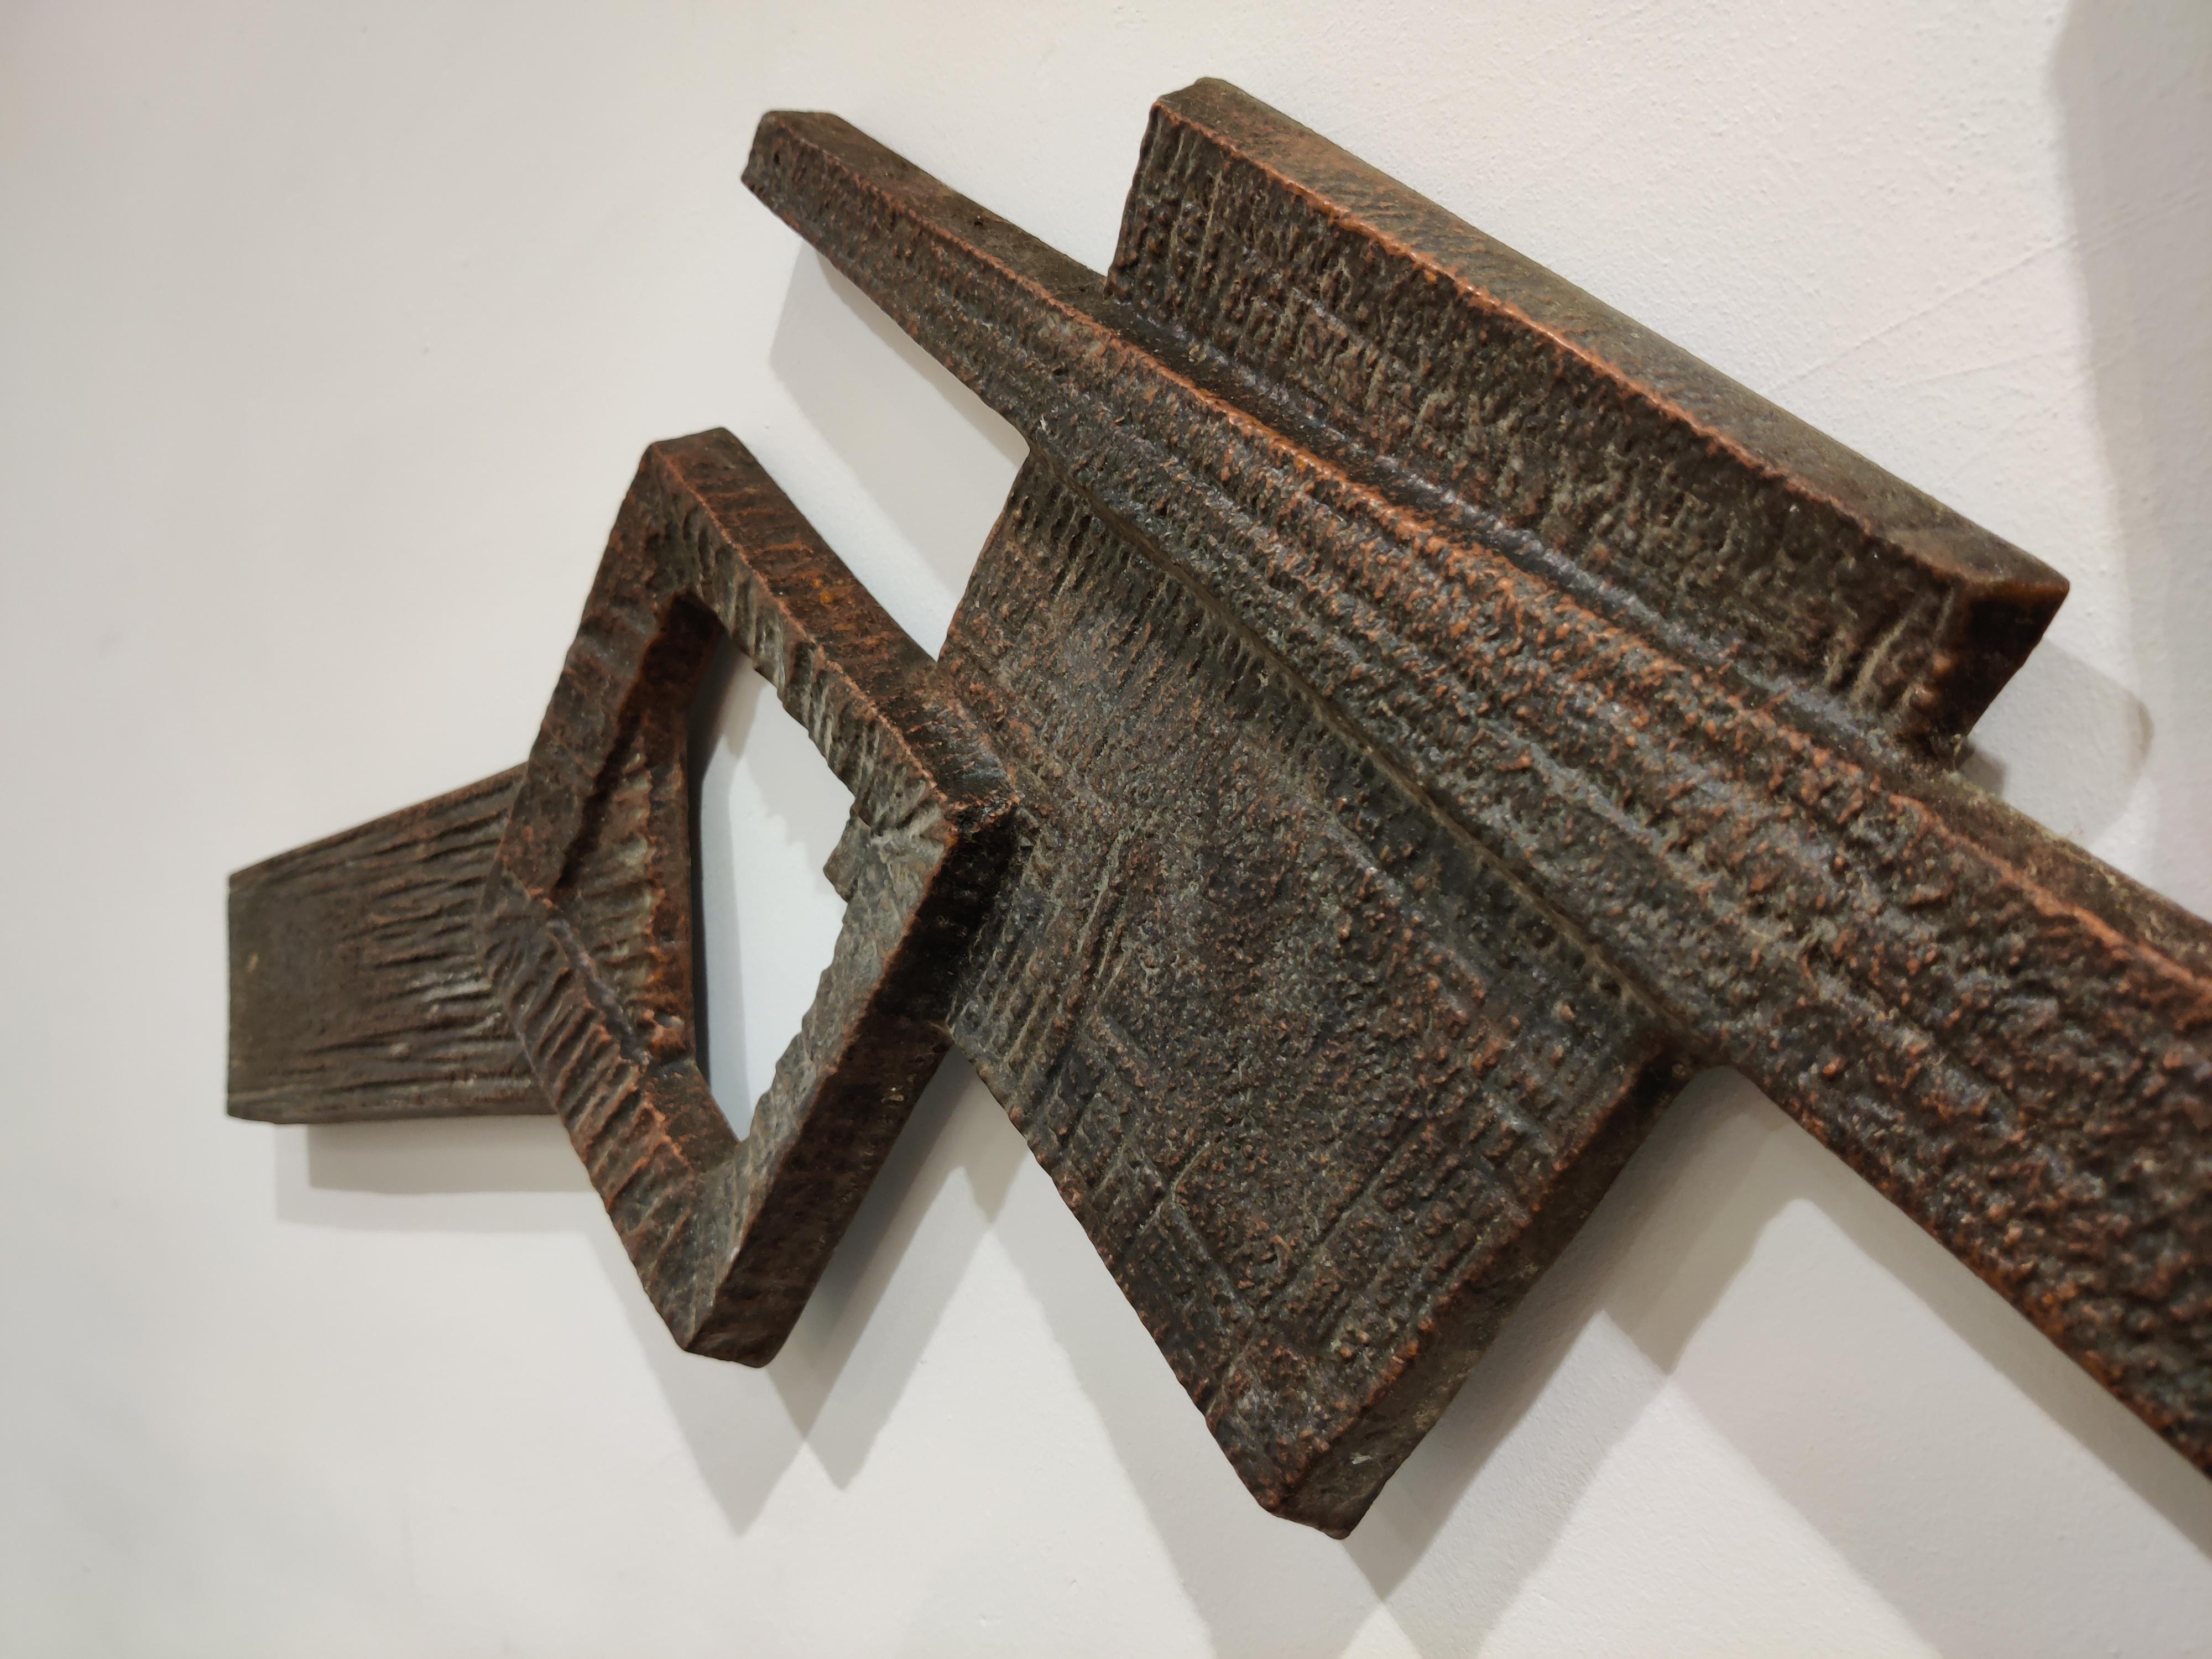 Architectural Brutalist wall mounted sculpture made from bronzed cast metal.

This typical 1970s Brutalist design sculpture is a great wall decor and served as a sculpture mounted on a door. It still has the holes for a door handle.

Rare due to